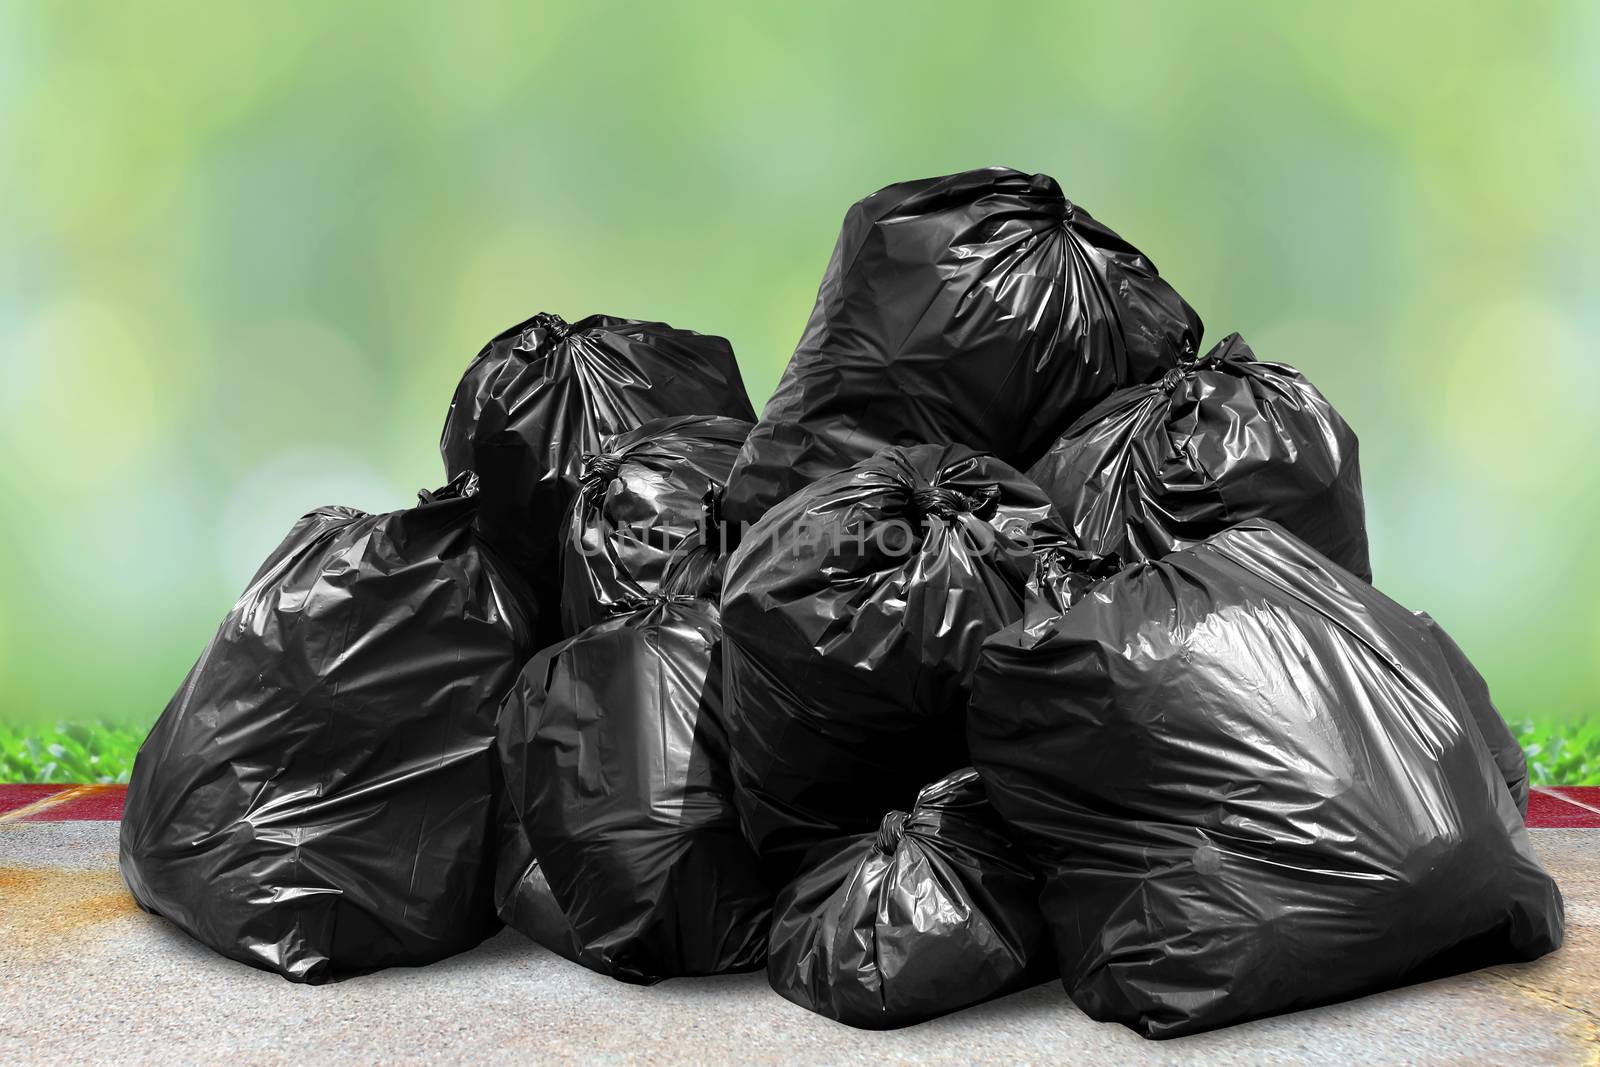 garbage is pile lots dump, many garbage plastic bags black waste on nature sunshine, pollution from trash plastic waste garbage, bags bin of plastic waste, pile of garbage waste, lots of junk dump